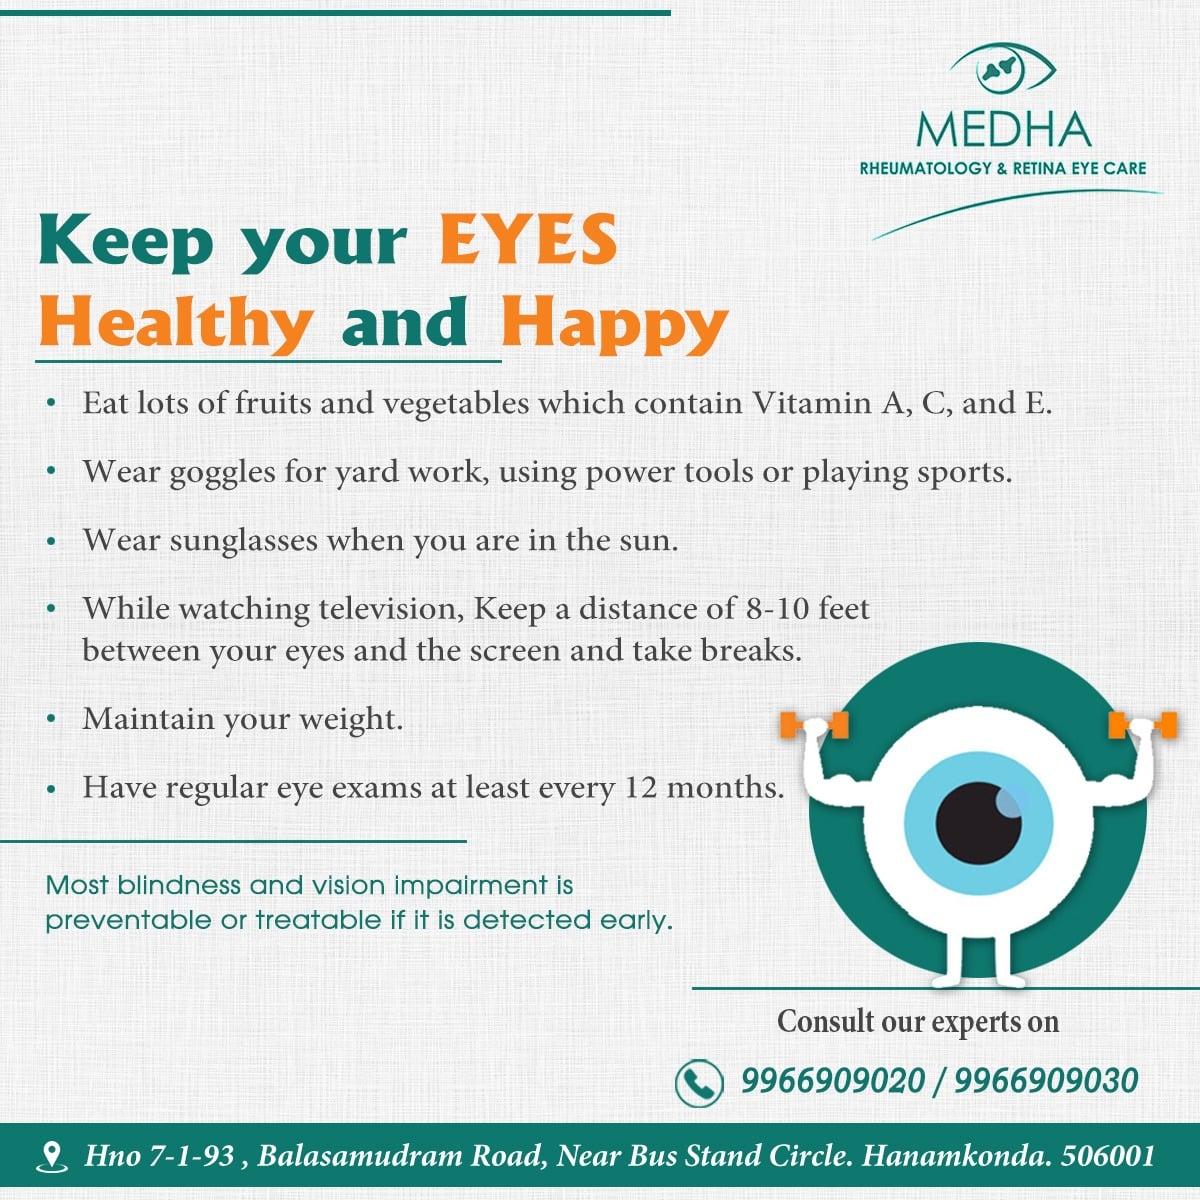 Keep your eyes Healthy and Happy.